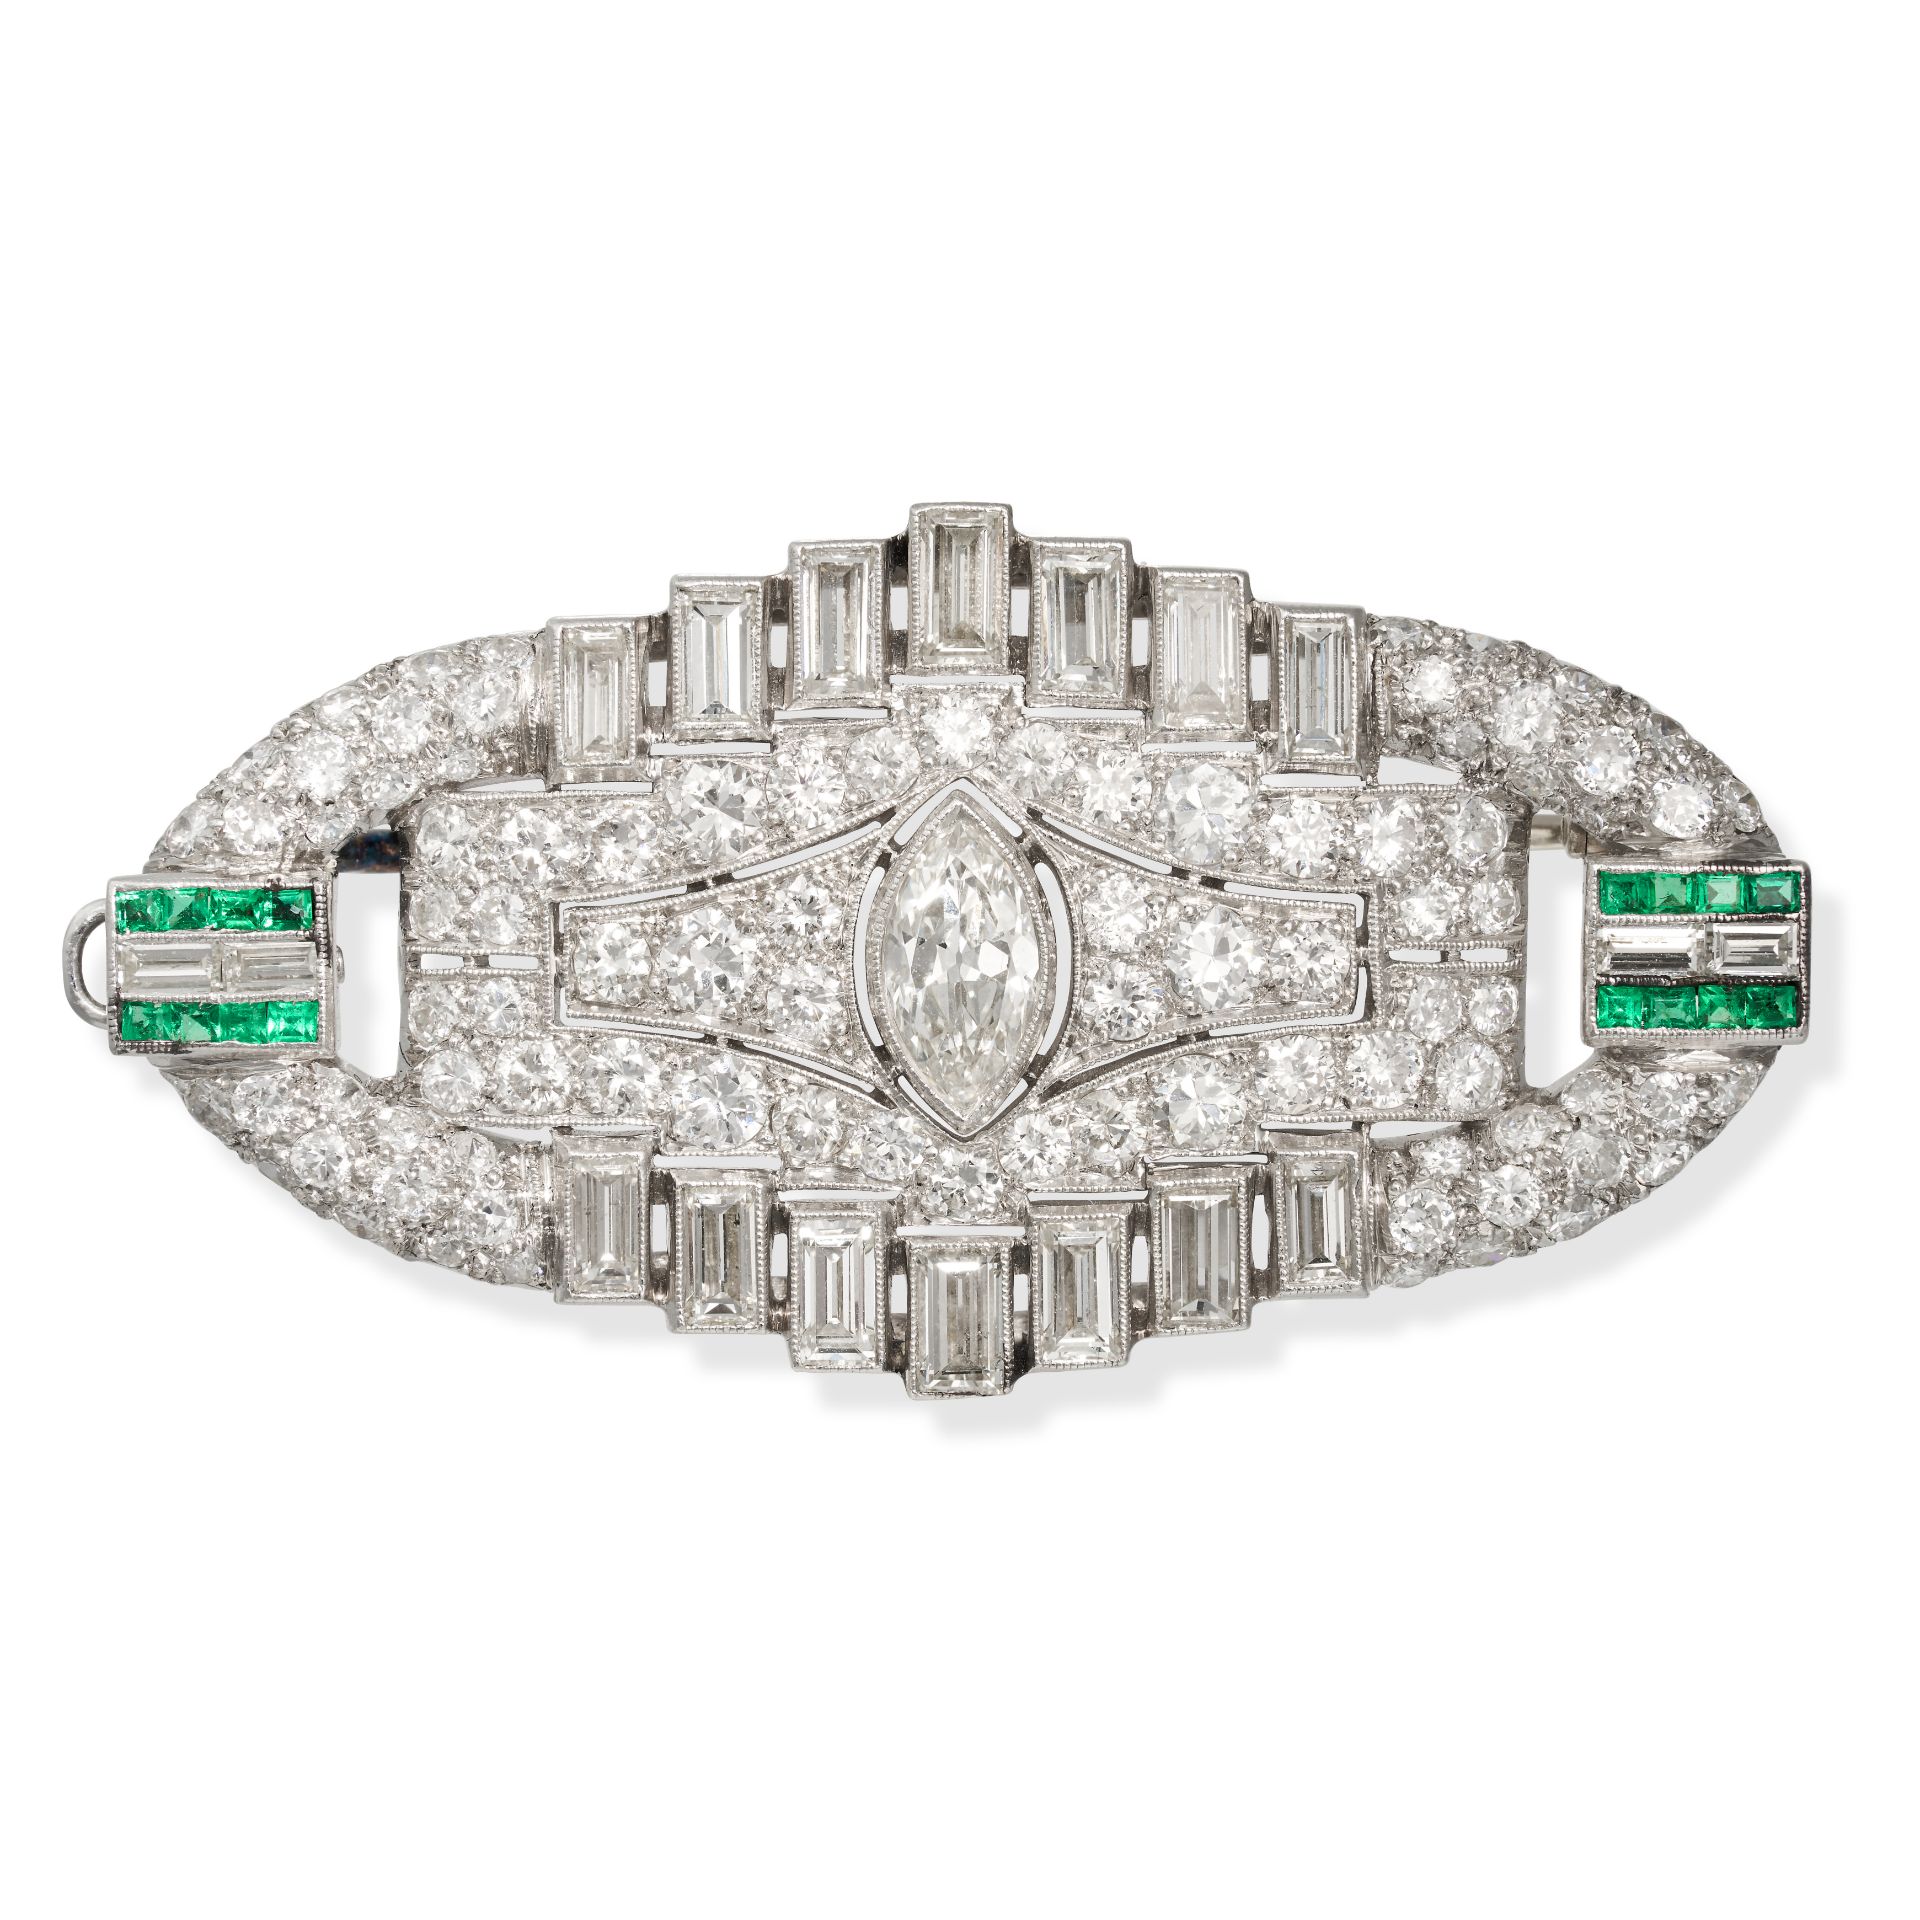 A FINE EMERALD AND DIAMOND BROOCH in platinum and white gold, the geometric brooch set to the cen...